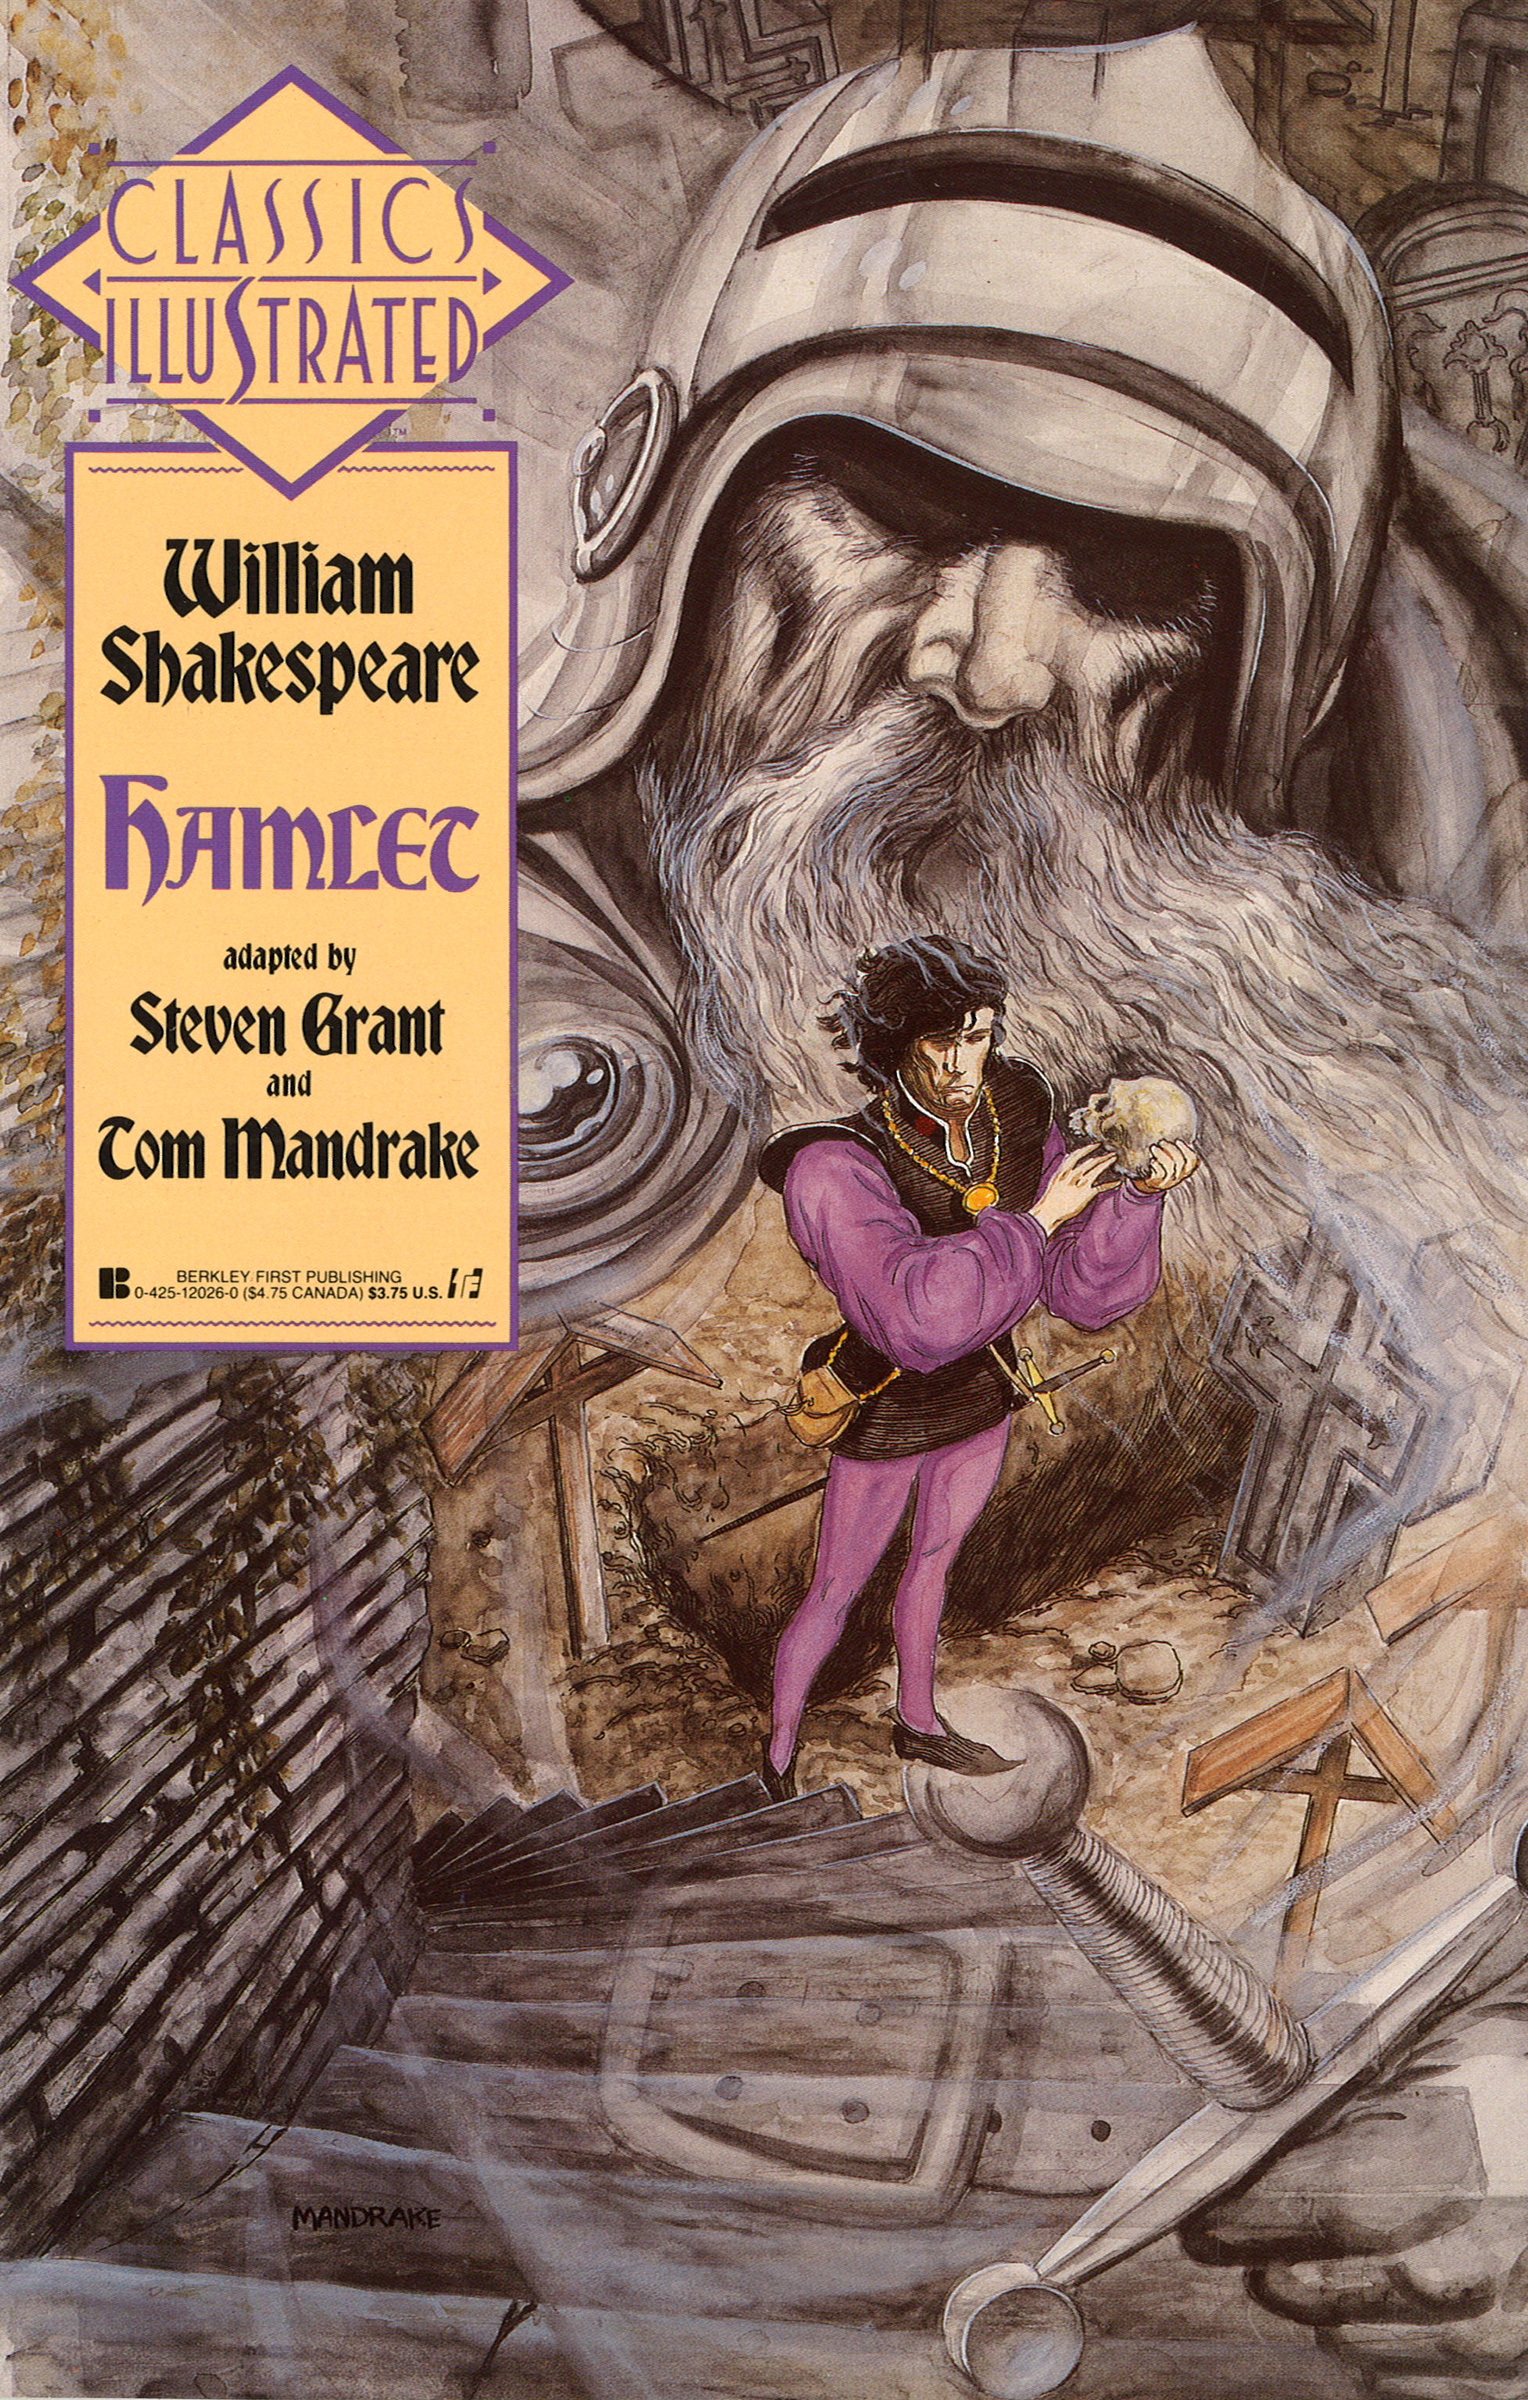 Cover of 1990 Classics Illustrated comic book version of Shakespeare's Hamlet